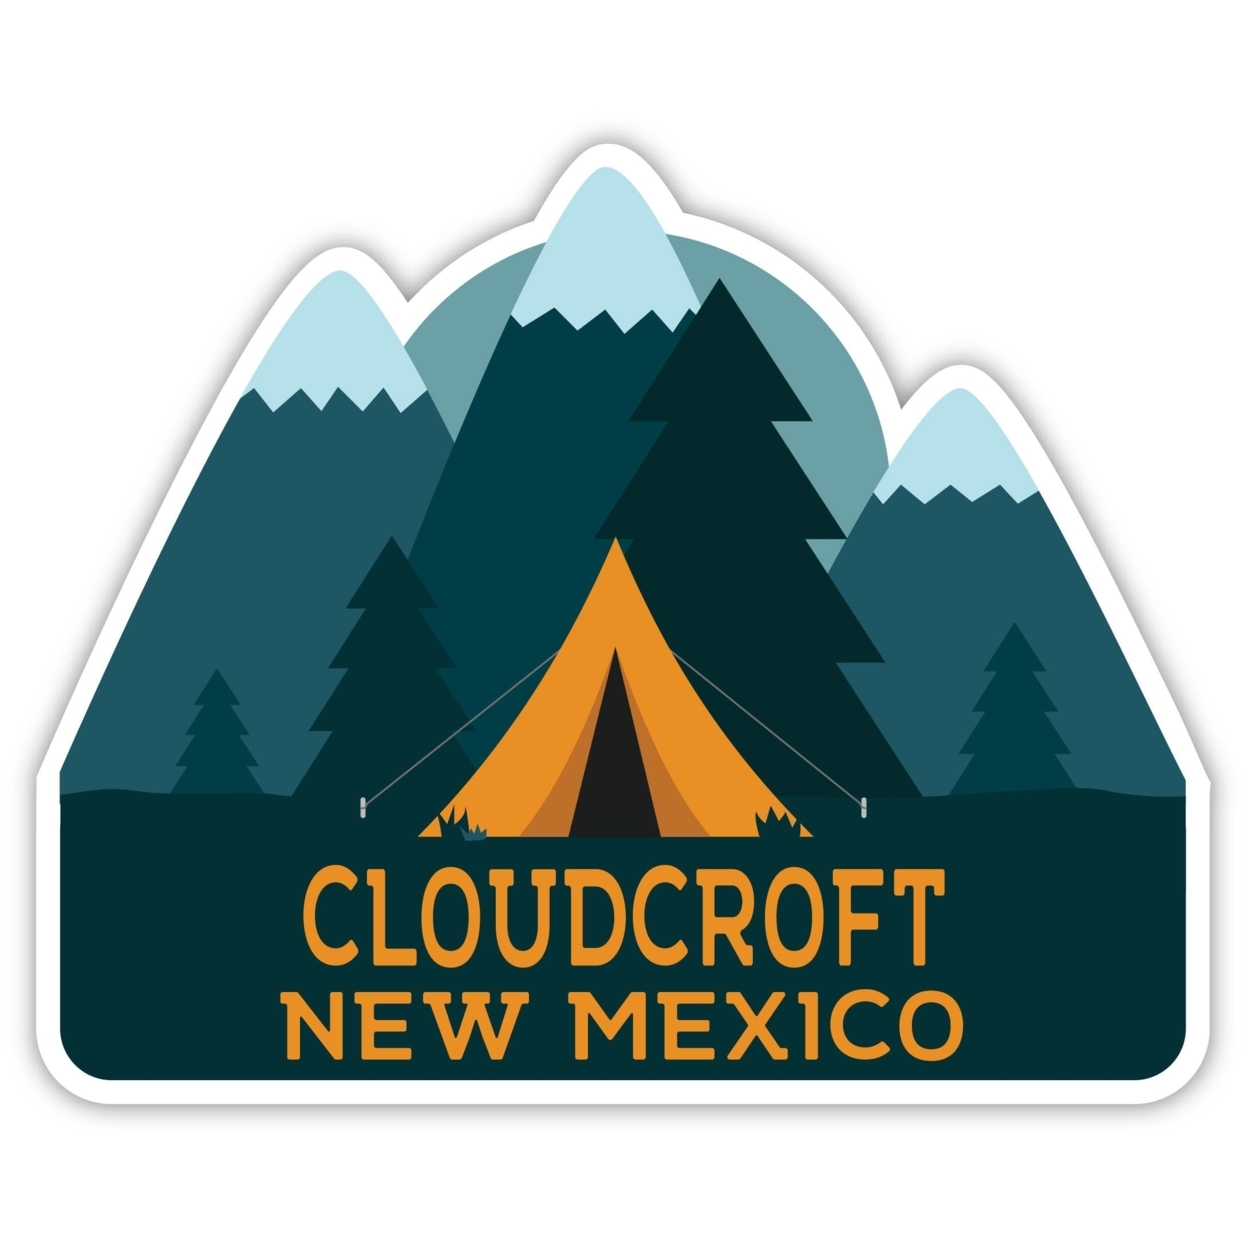 Cloudcroft New Mexico Souvenir Decorative Stickers (Choose Theme And Size) - 4-Pack, 10-Inch, Great Outdoors